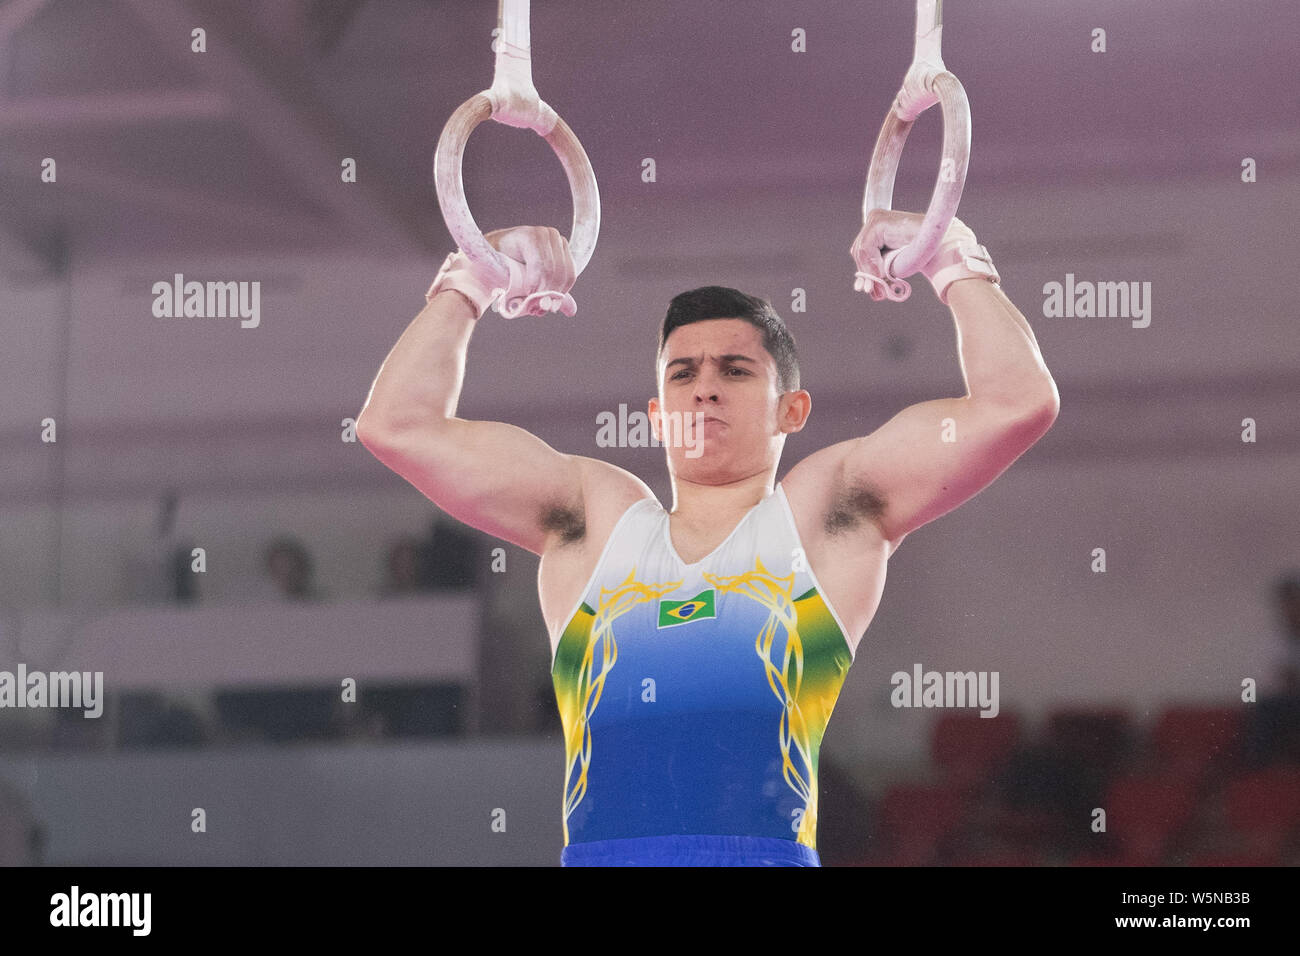 Lima, Peru. 28th July, 2019. Luis Porto (#79) of Brazil performs on the still rings during the Pan American Games Artistic Gymnastics, Men's Team Qualification and Final at Polideportivo Villa el Salvador in Lima, Peru. Daniel Lea/CSM/Alamy Live News Stock Photo